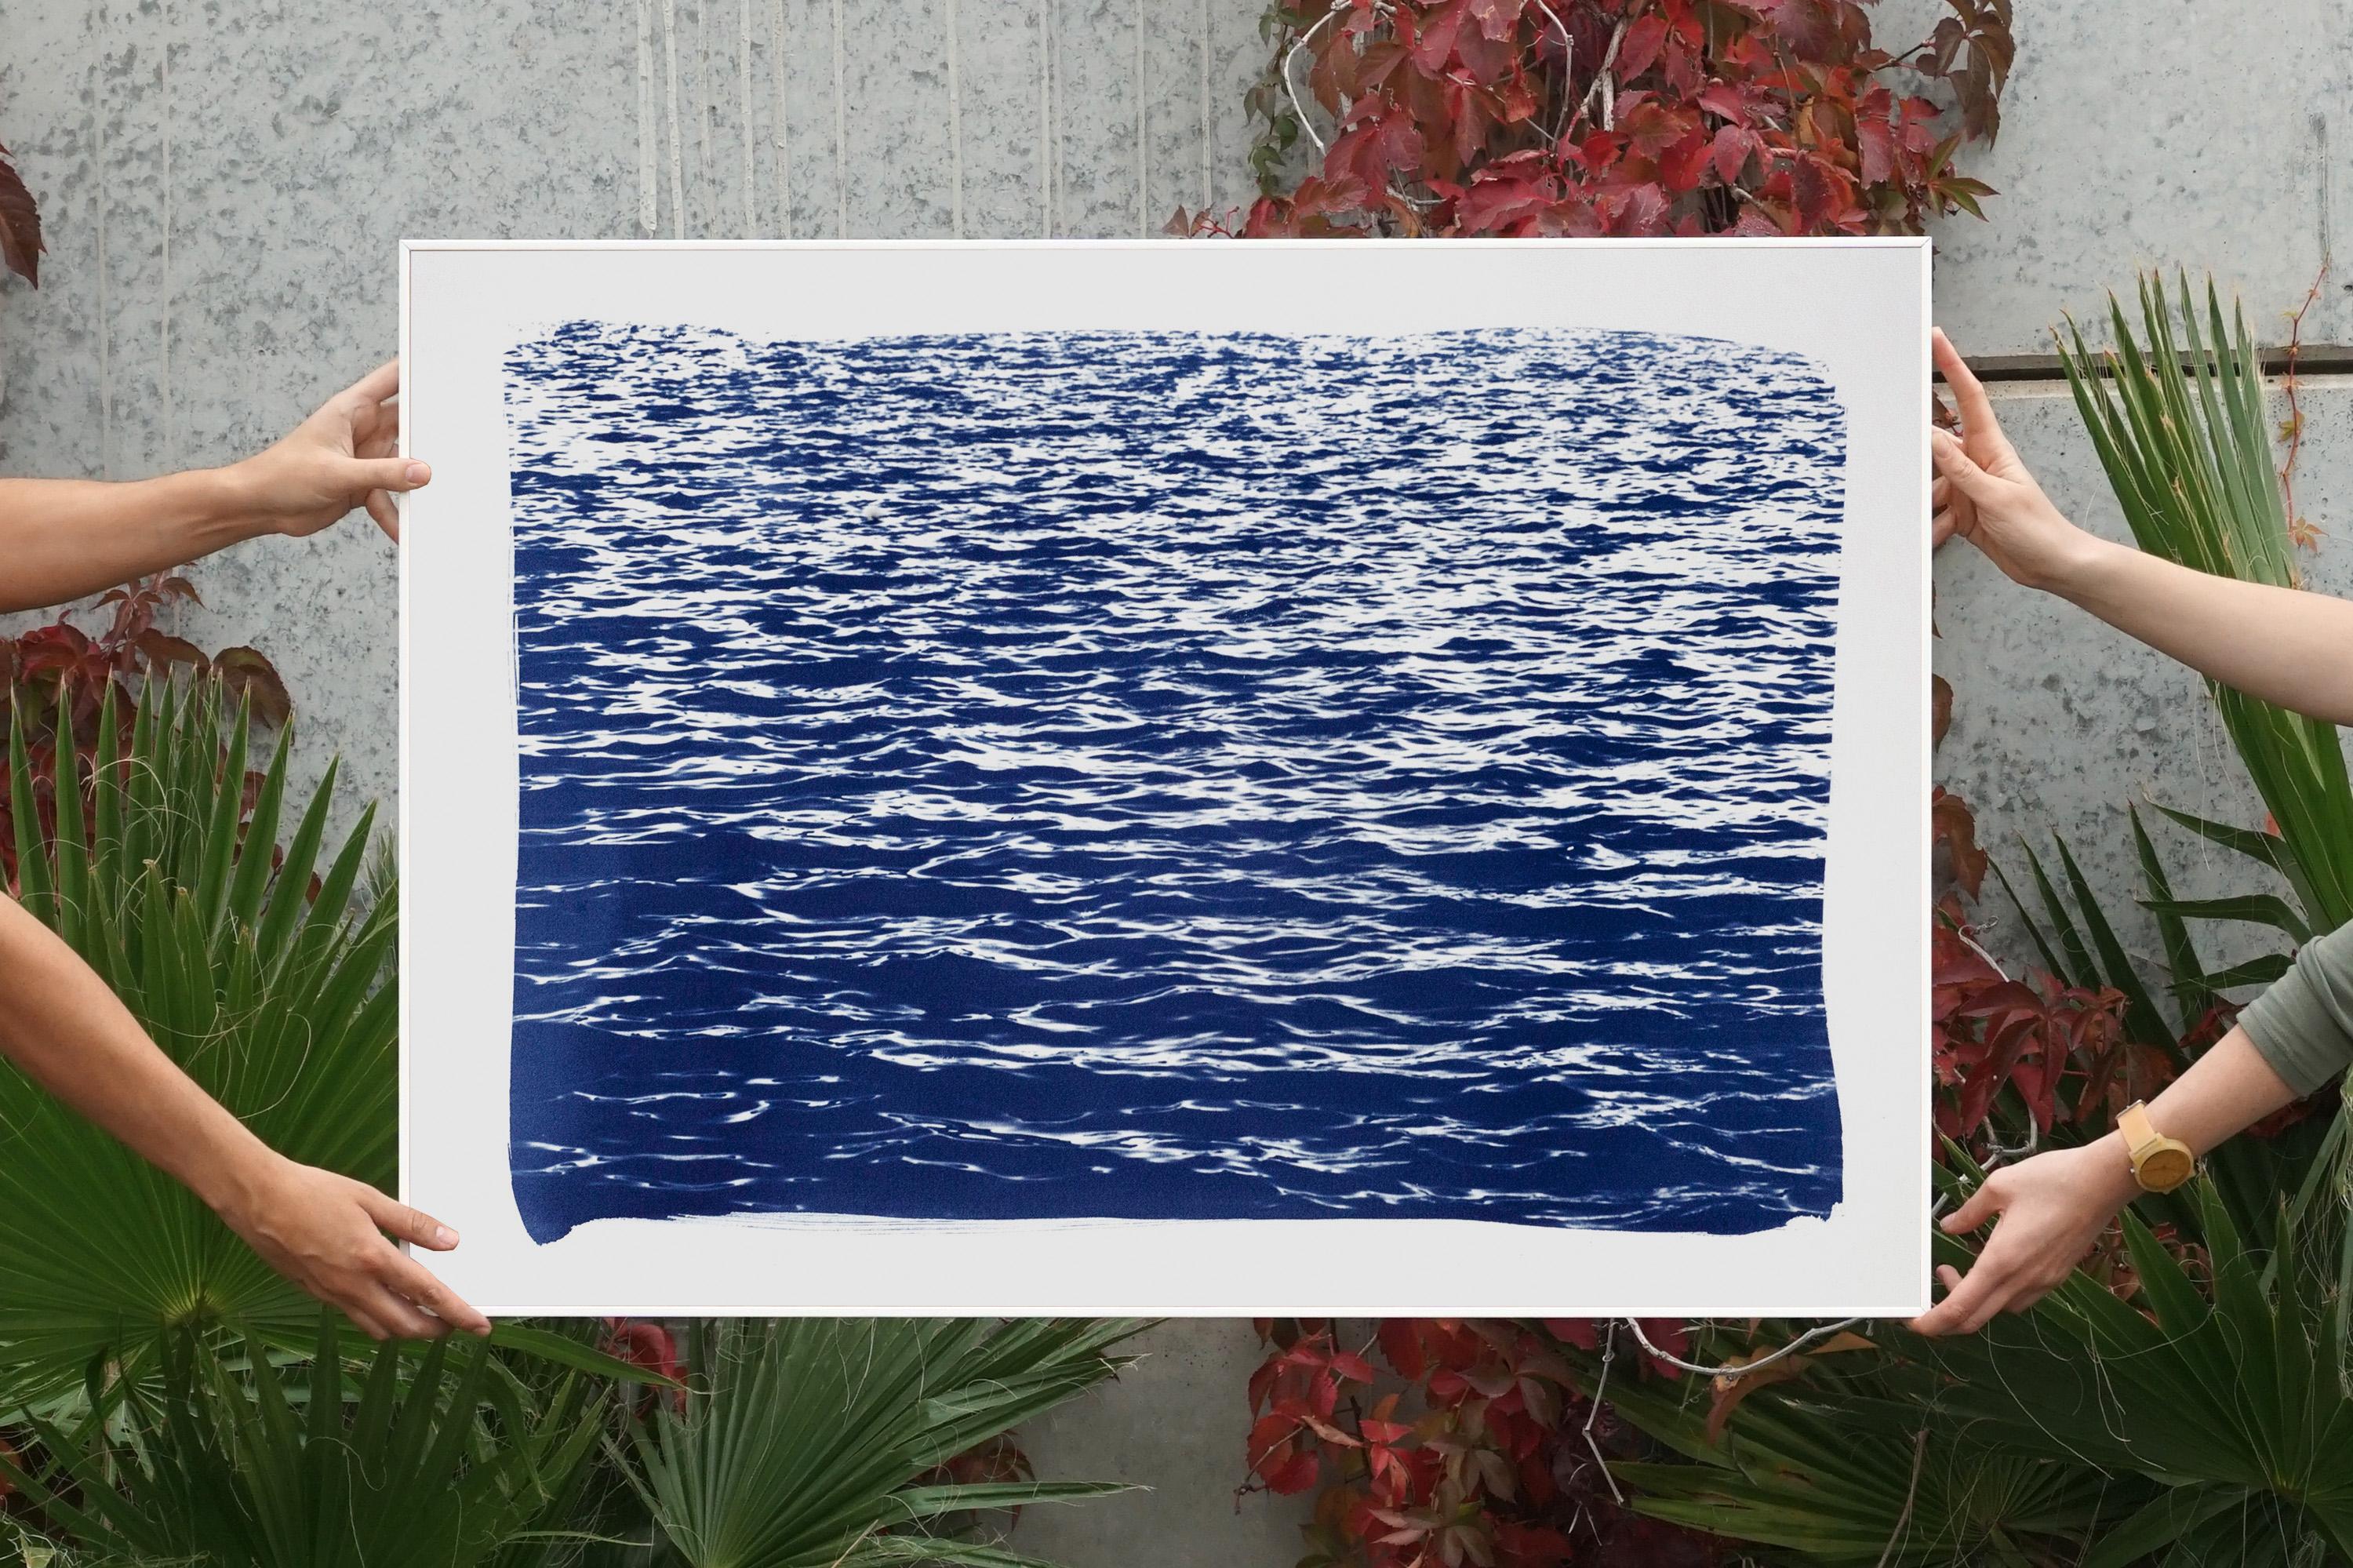 Mediterranean Seascape Cyanotype, Nautical Print of Sea Waves in Blue, Feng Shui - Realist Photograph by Kind of Cyan